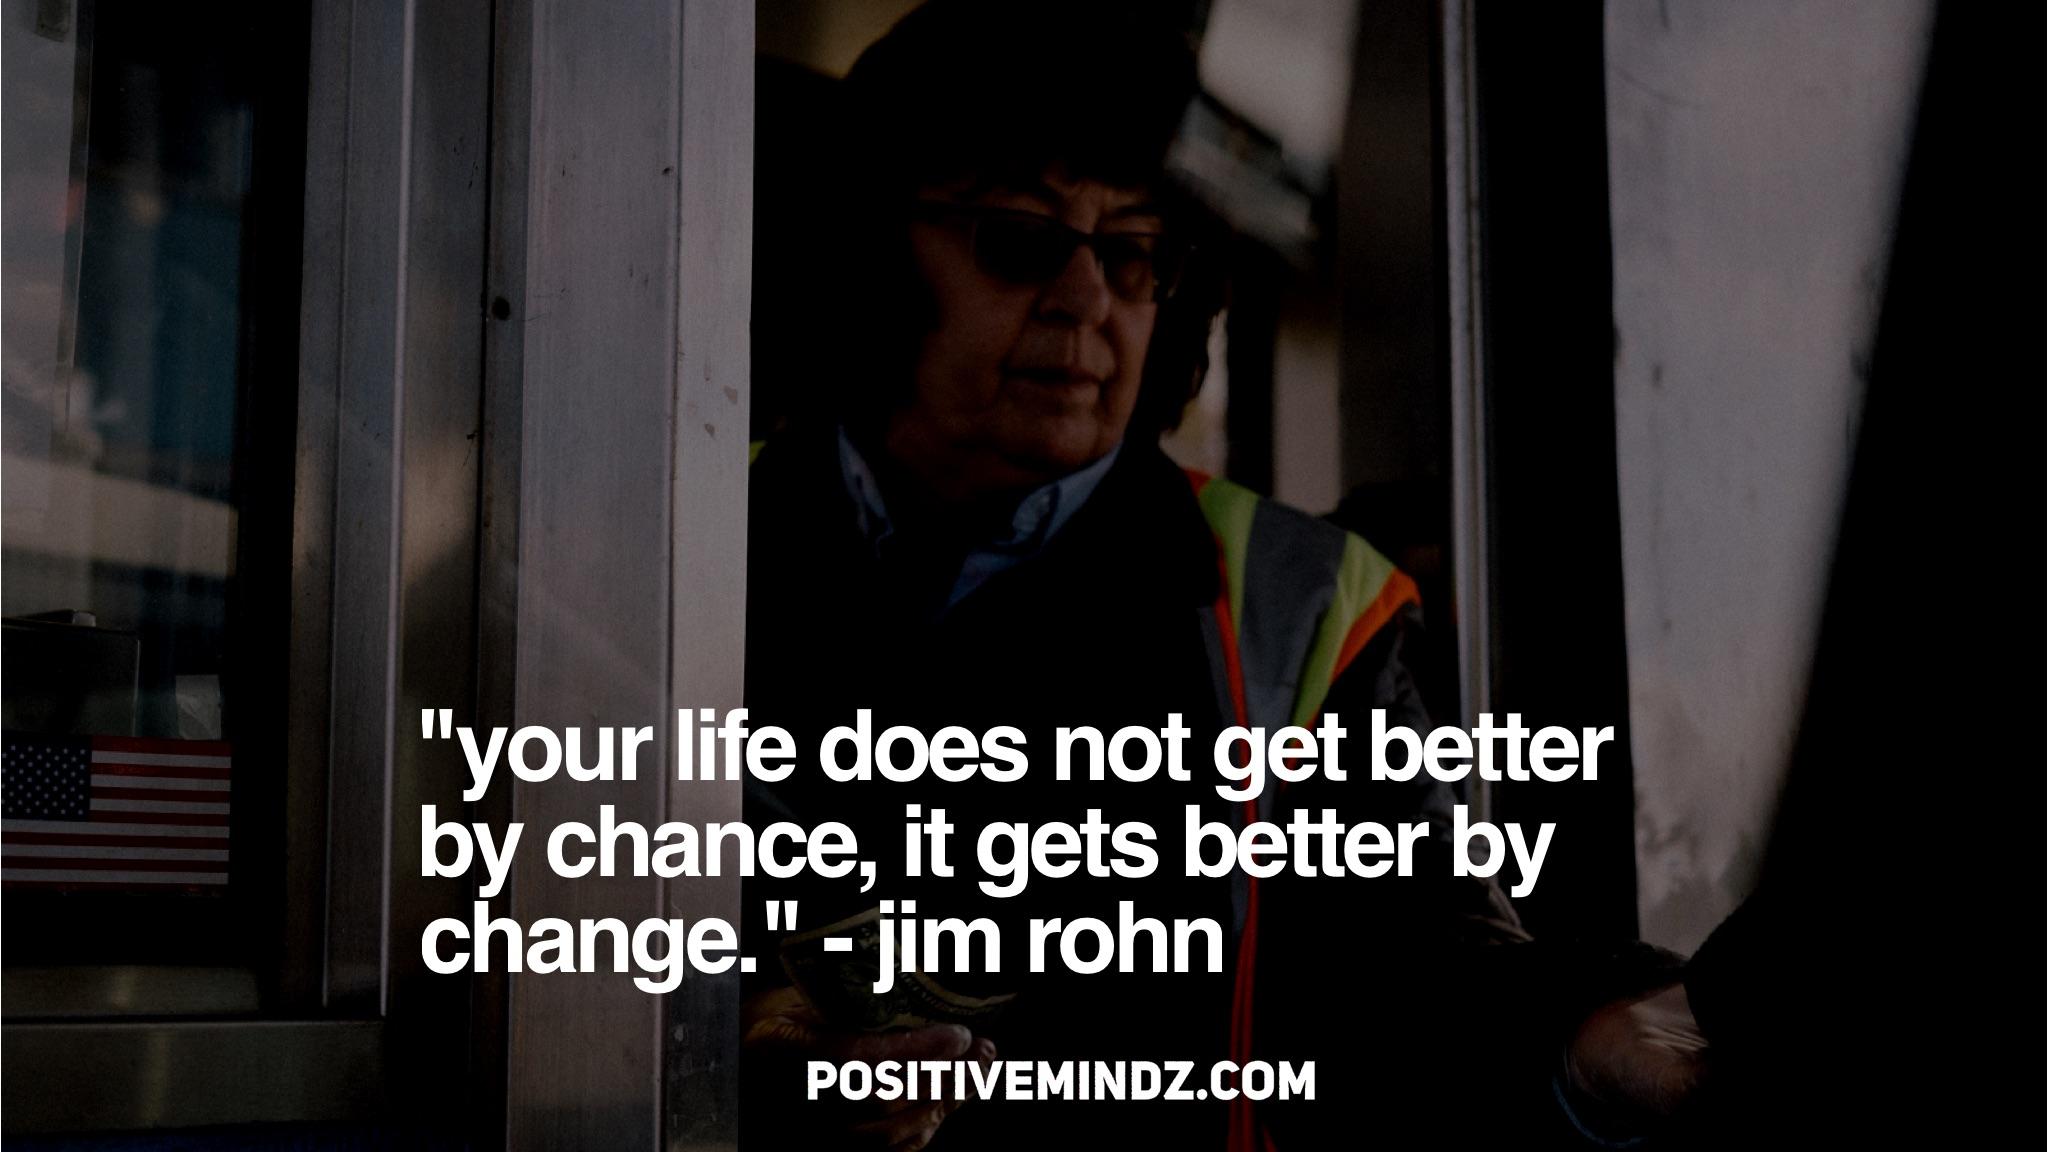 Your life does not get better by chance, it gets better